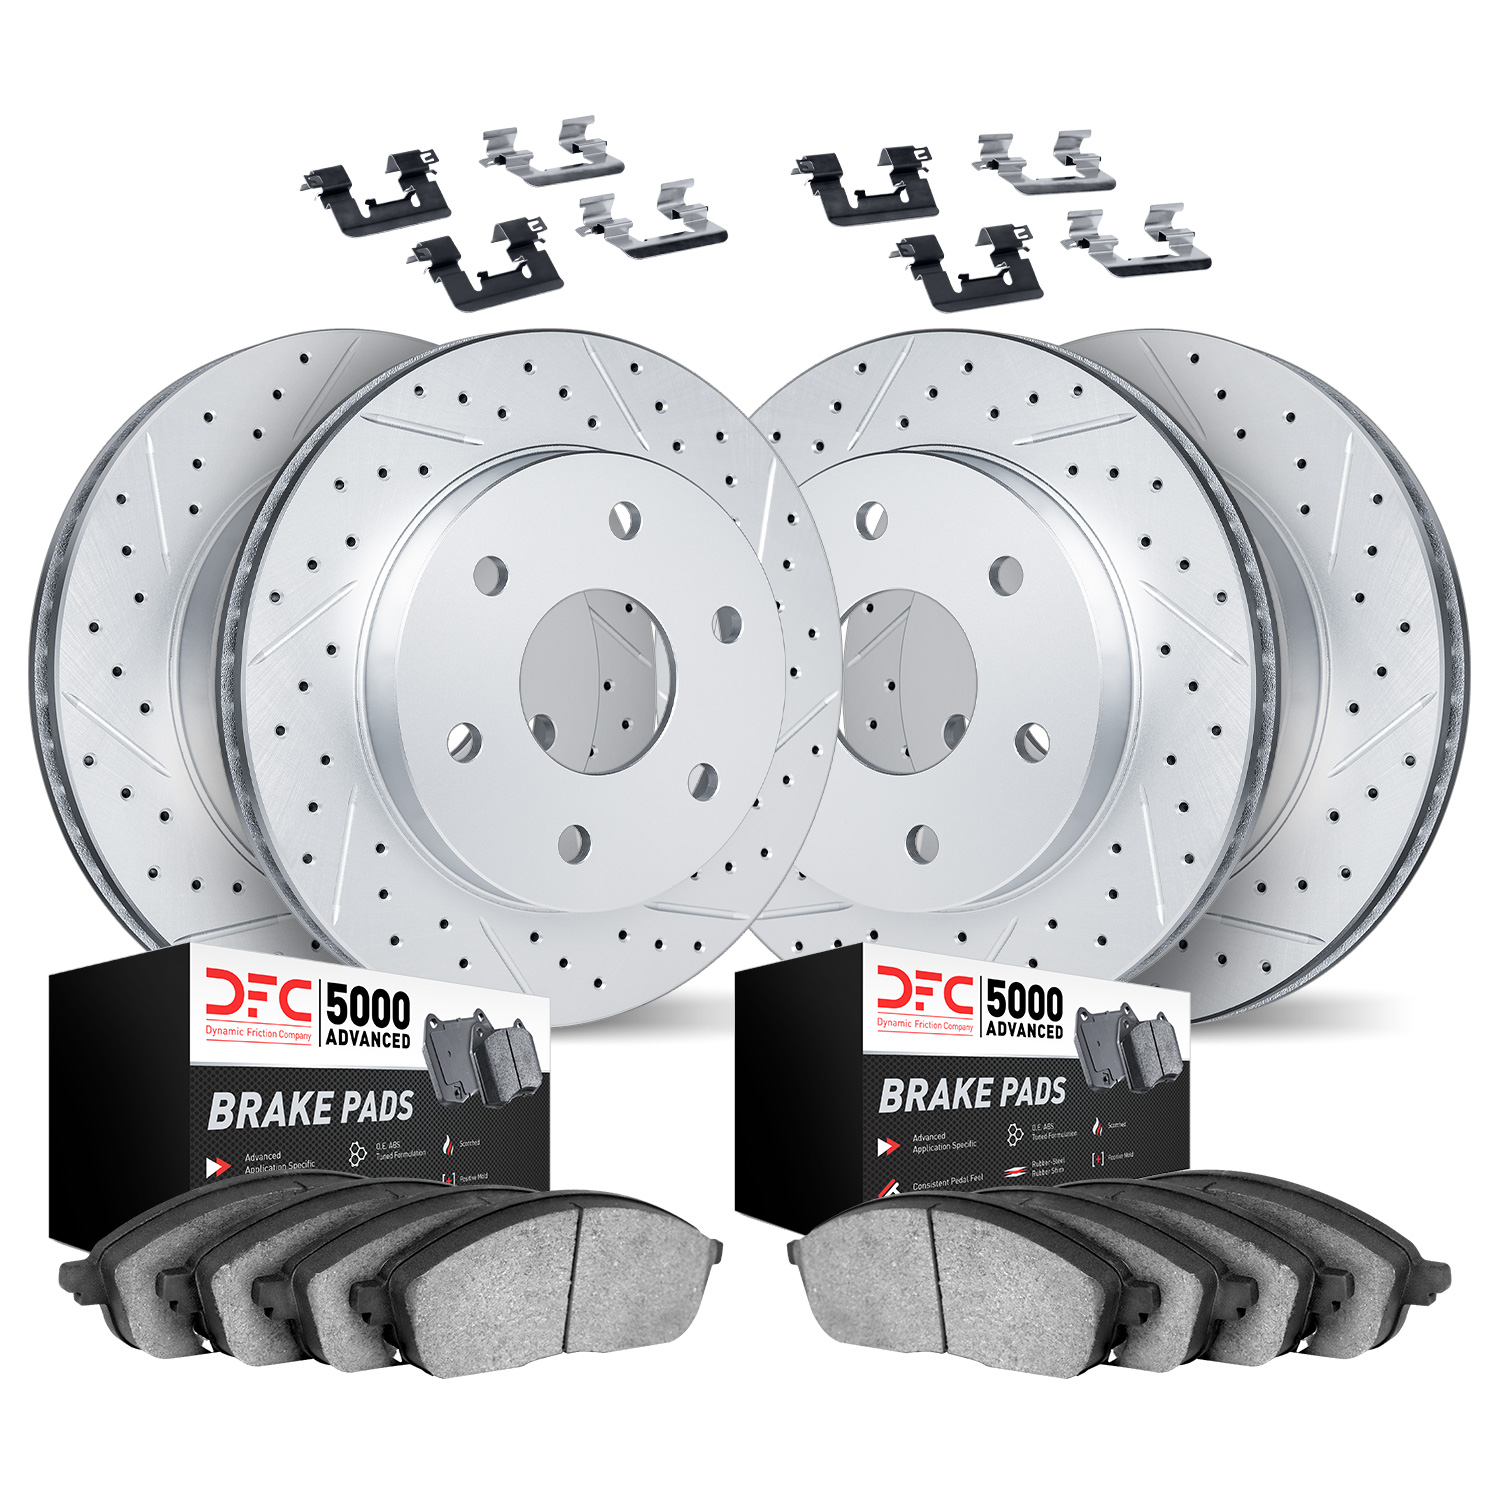 2514-48018 Geoperformance Drilled/Slotted Rotors w/5000 Advanced Brake Pads Kit & Hardware, 2003-2007 GM, Position: Front and Re